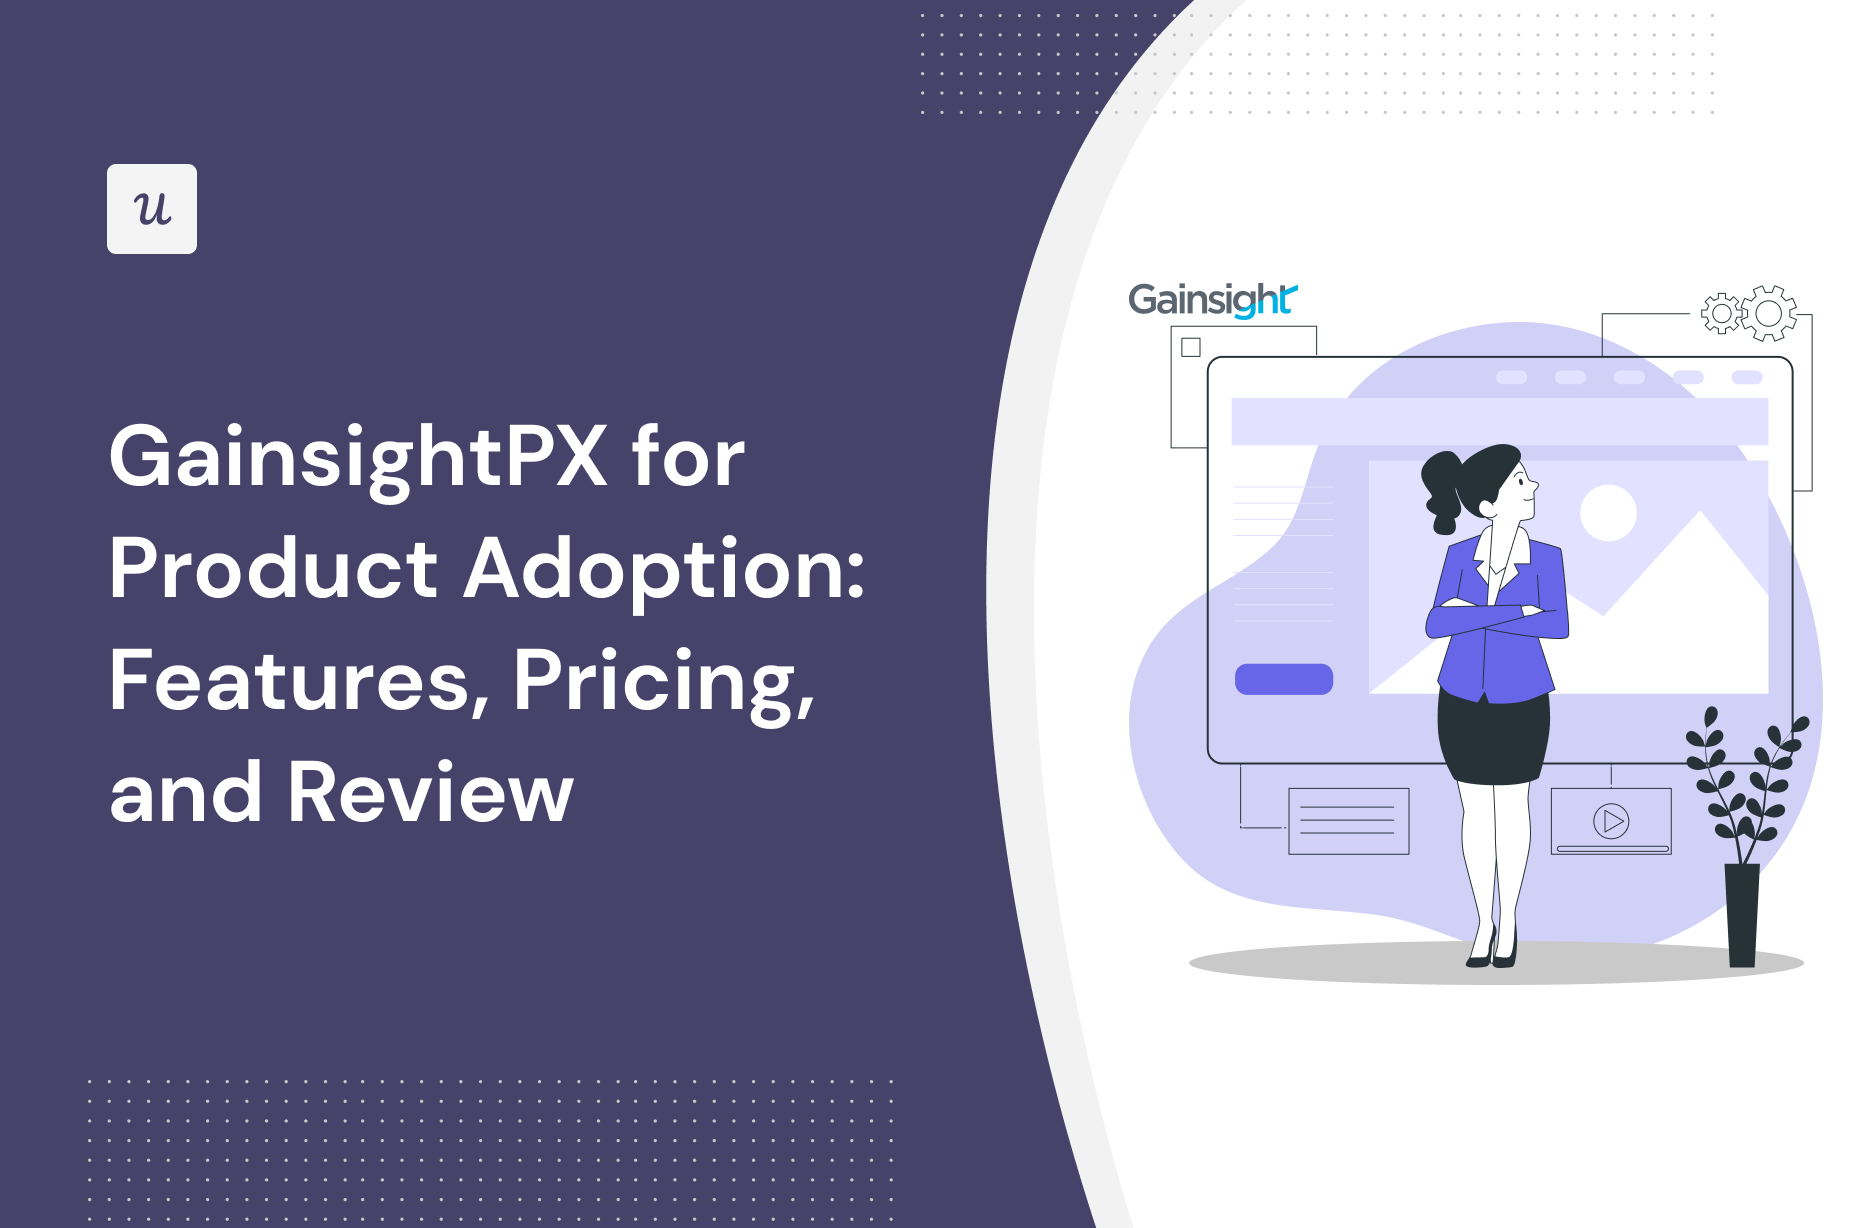 GainsightPX for Product Adoption: Features, Pricing, and Review